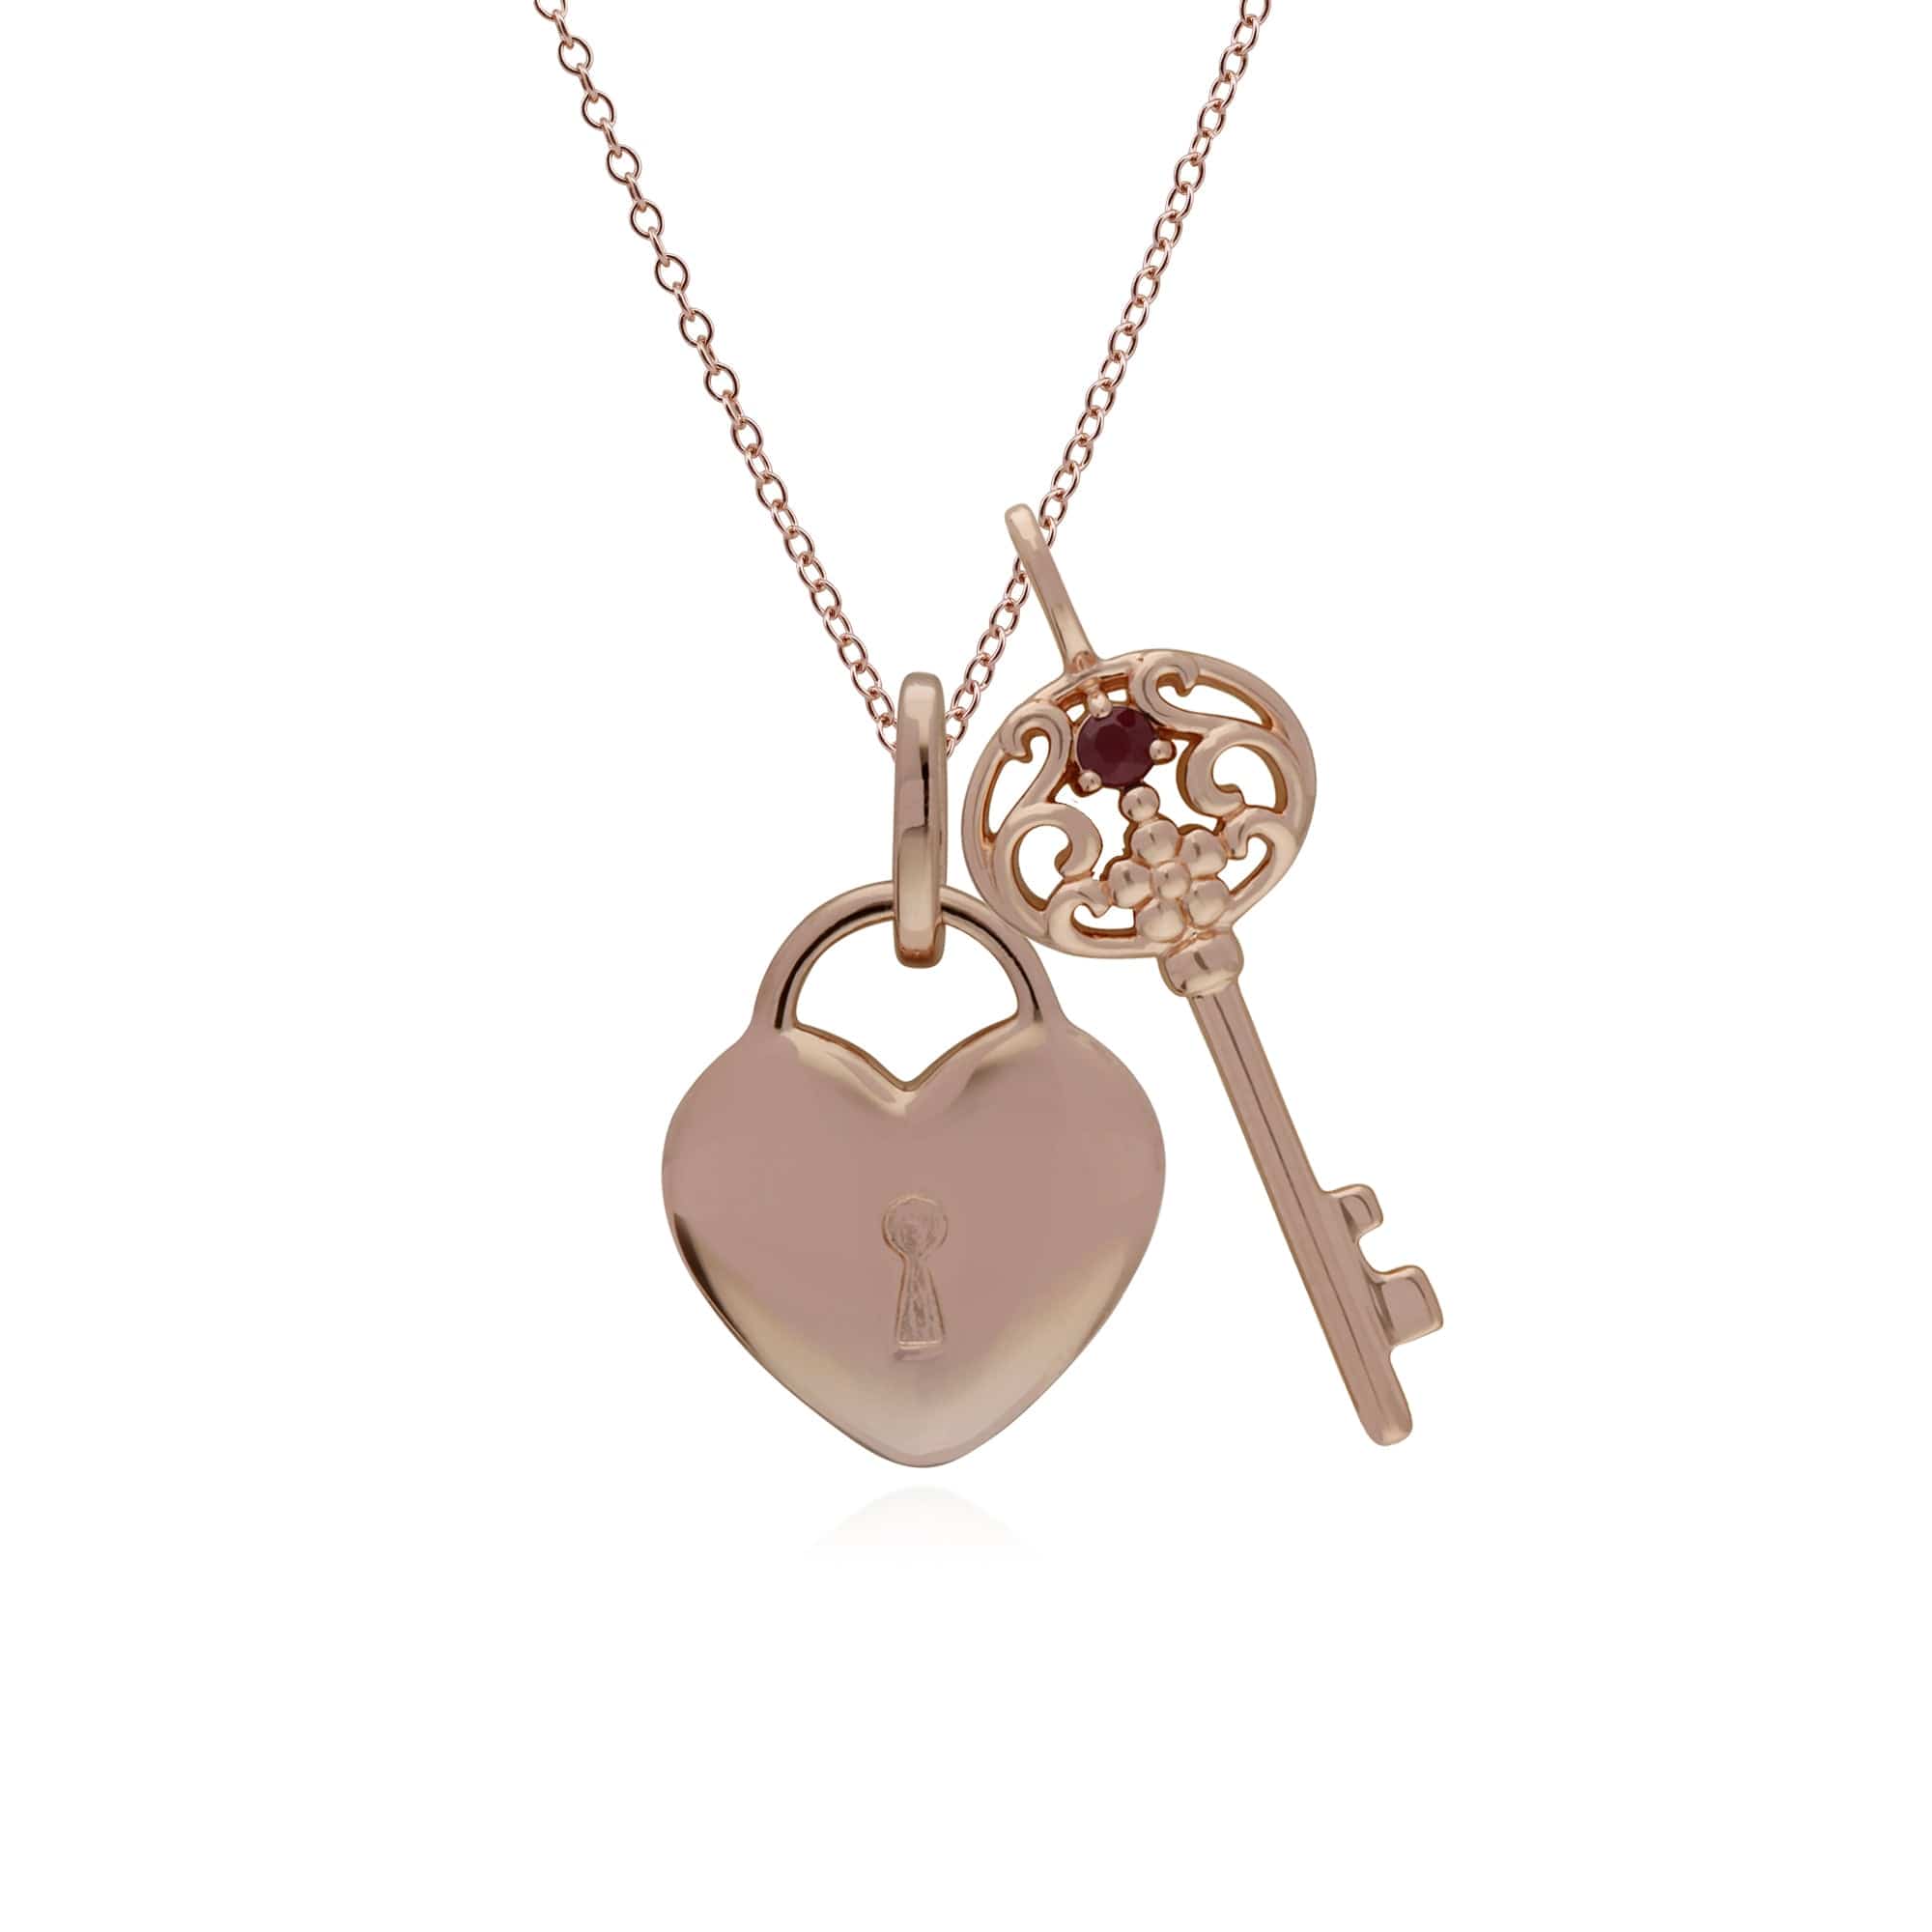 270P026703925-270P026901925 Classic Heart Lock Pendant & Ruby Big Key Charm in Rose Gold Plated 925 Sterling Silver 1